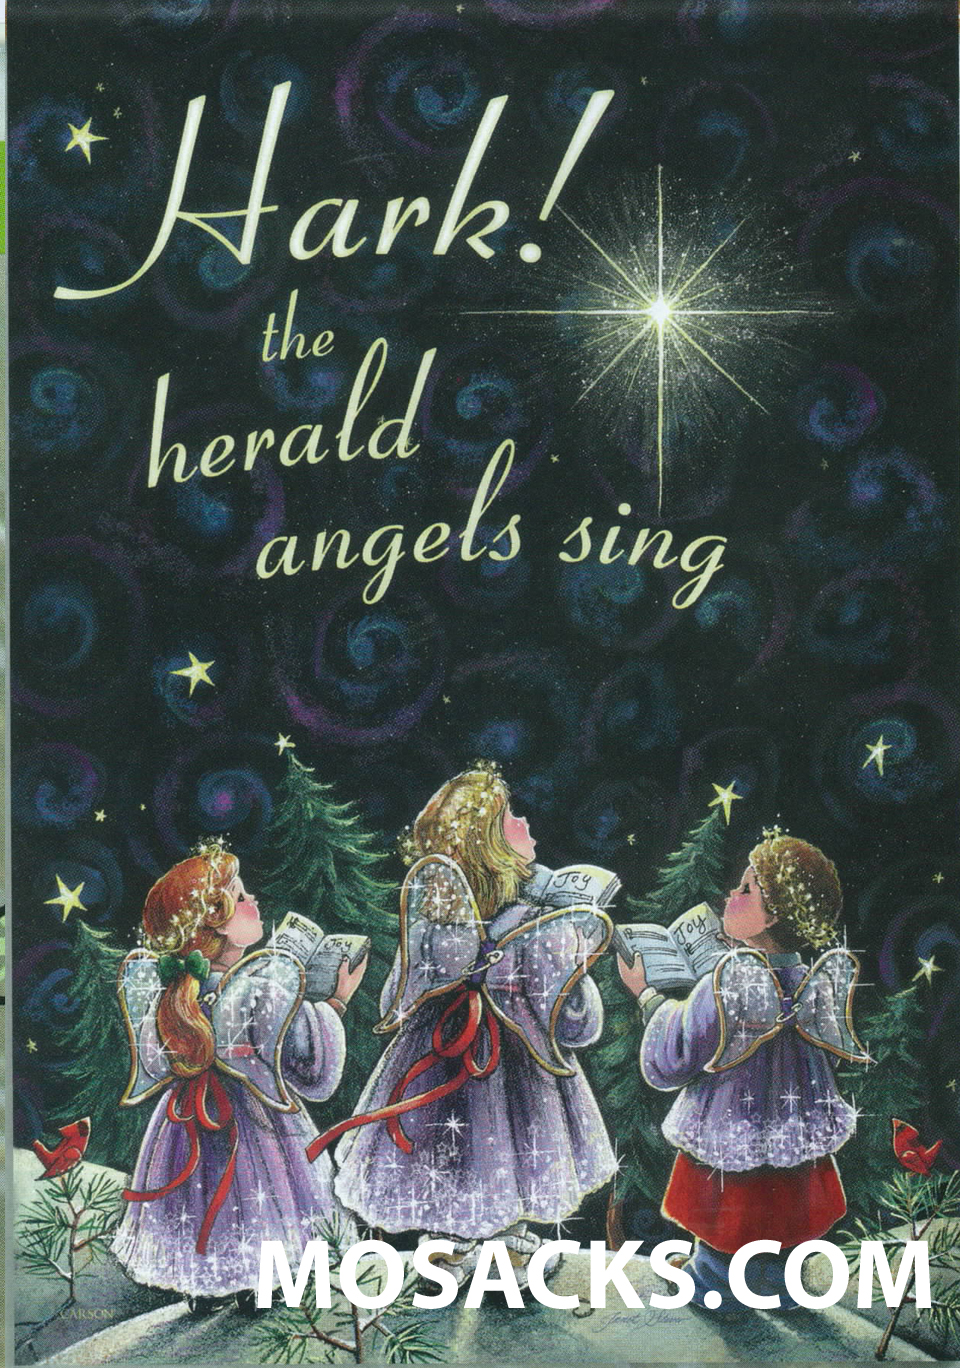 Flagtrends by Carson Christmas Flag Angel Choir 28x40 Inch Double-Sided Flag 480-47973 with the verse Hark! the herald angels sing